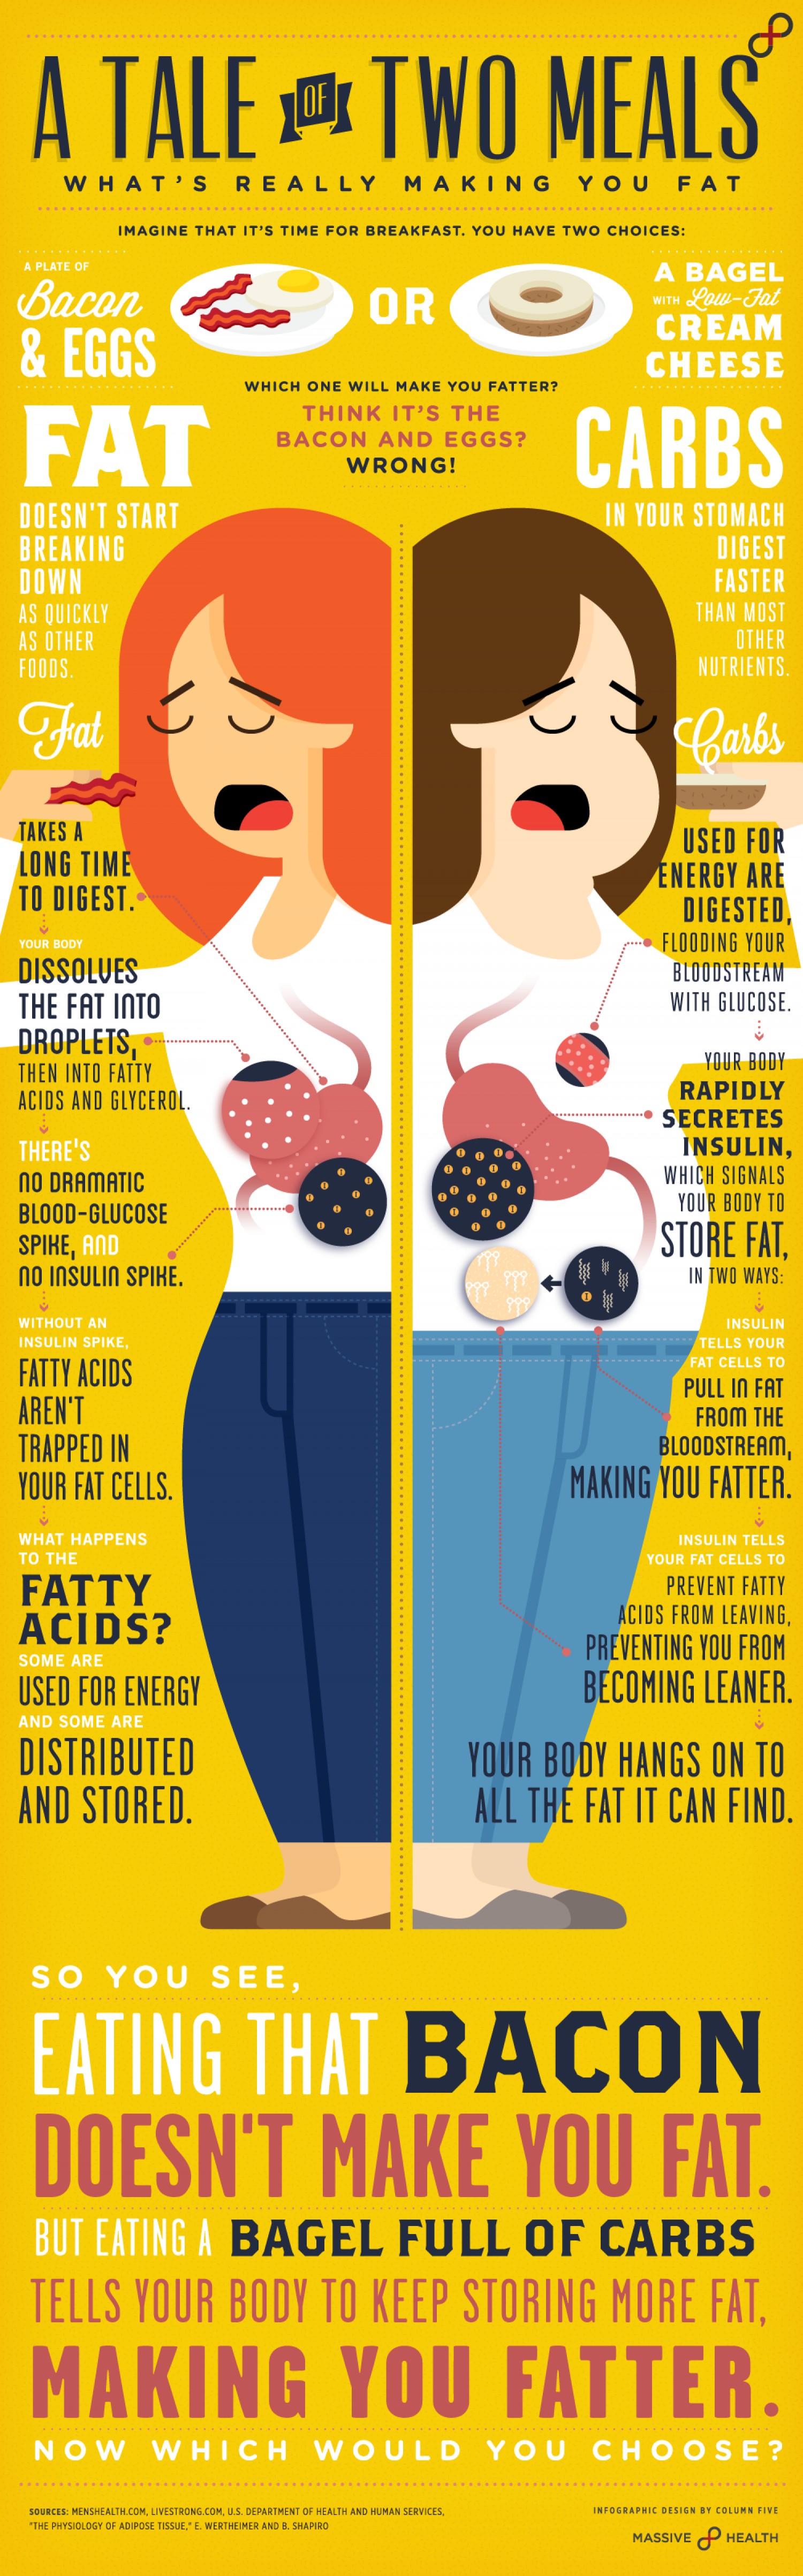 A Tale of Two Meals: What's Really Making Your Fat?